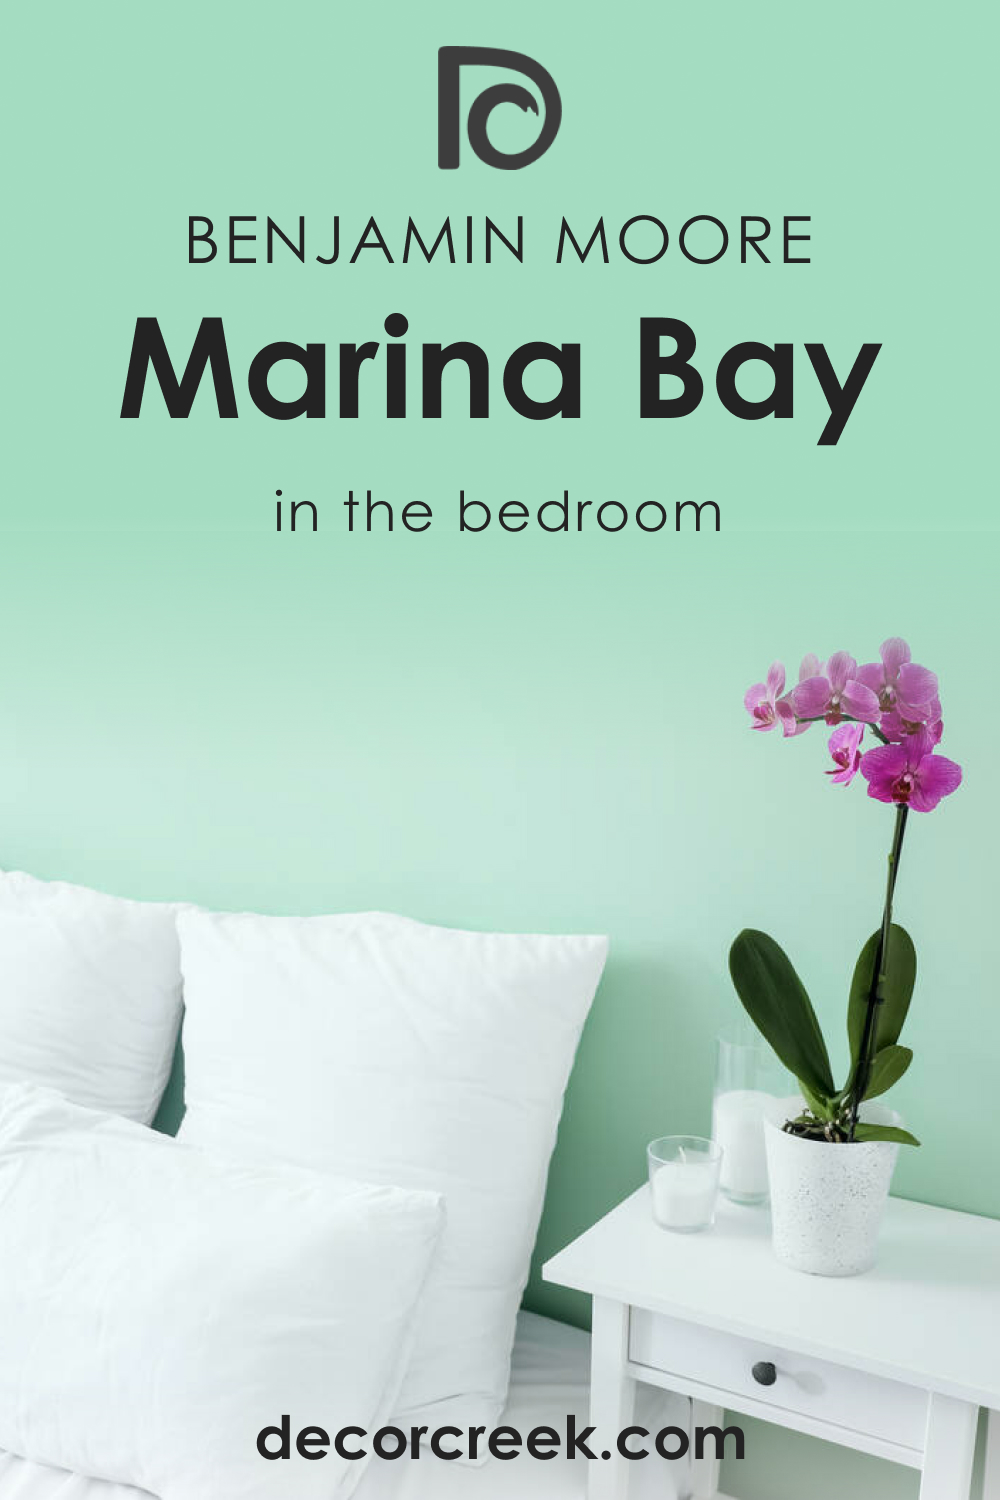 How to Use Marina Bay 2036-50 in the Bedroom?